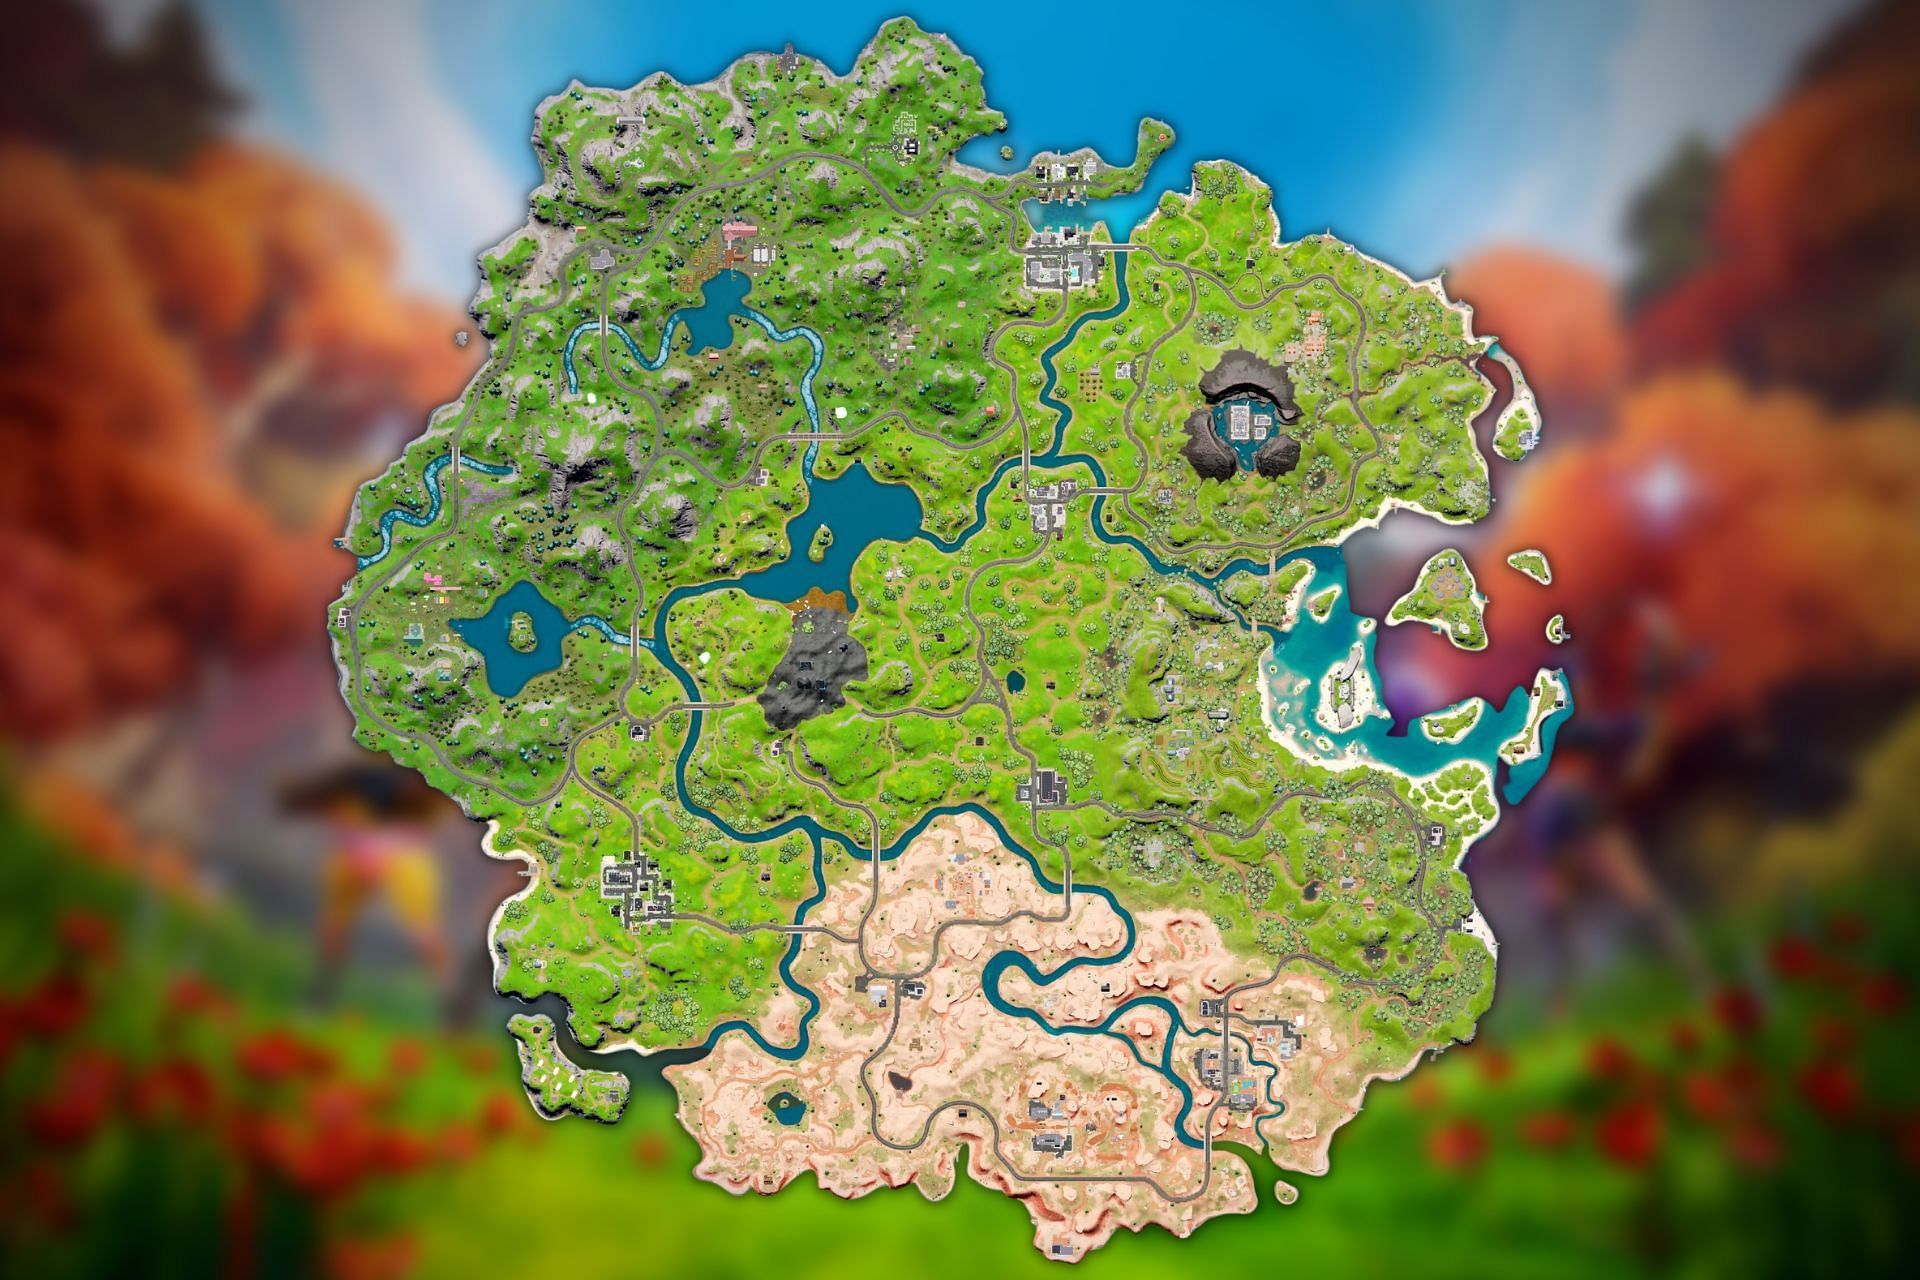 Fortnite players will get to experience an almost new map as leaks reveal that the snow will soon melt (Image via Sportskeeda)